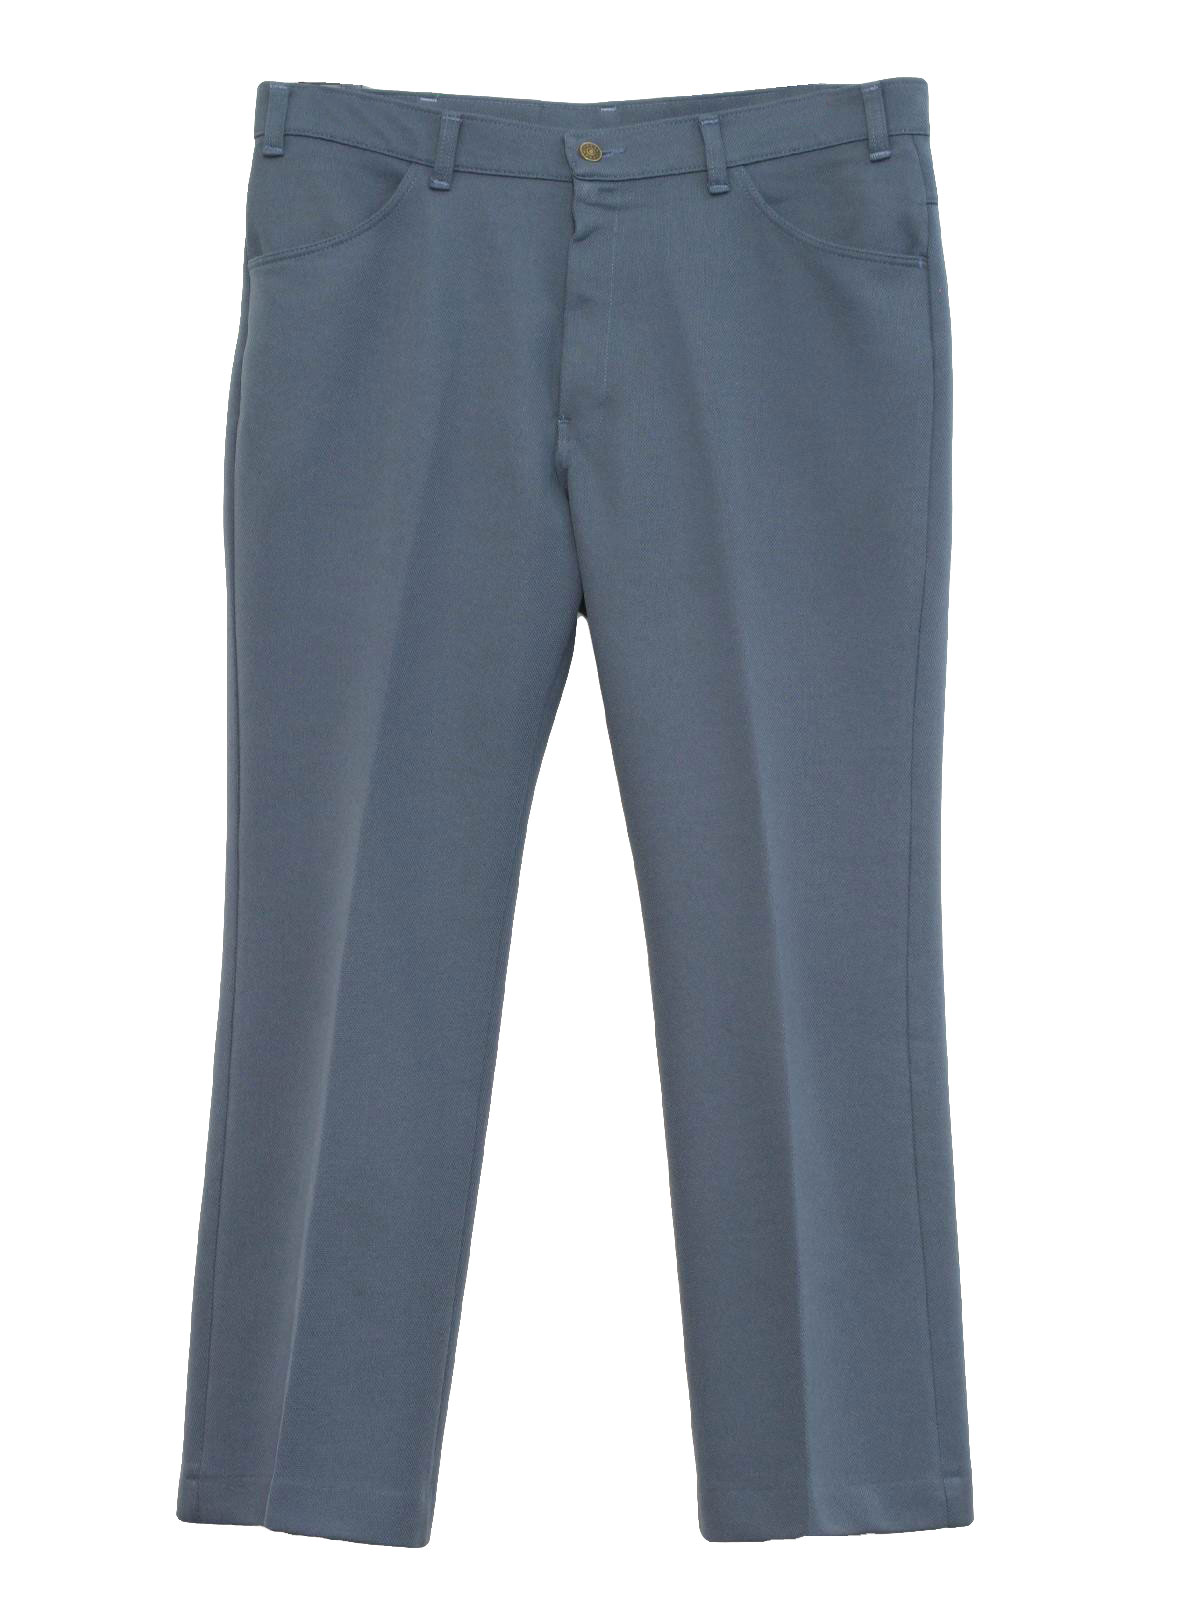 Vintage 1970's Flared Pants / Flares: 70s -Farah- Mens gray polyester ...